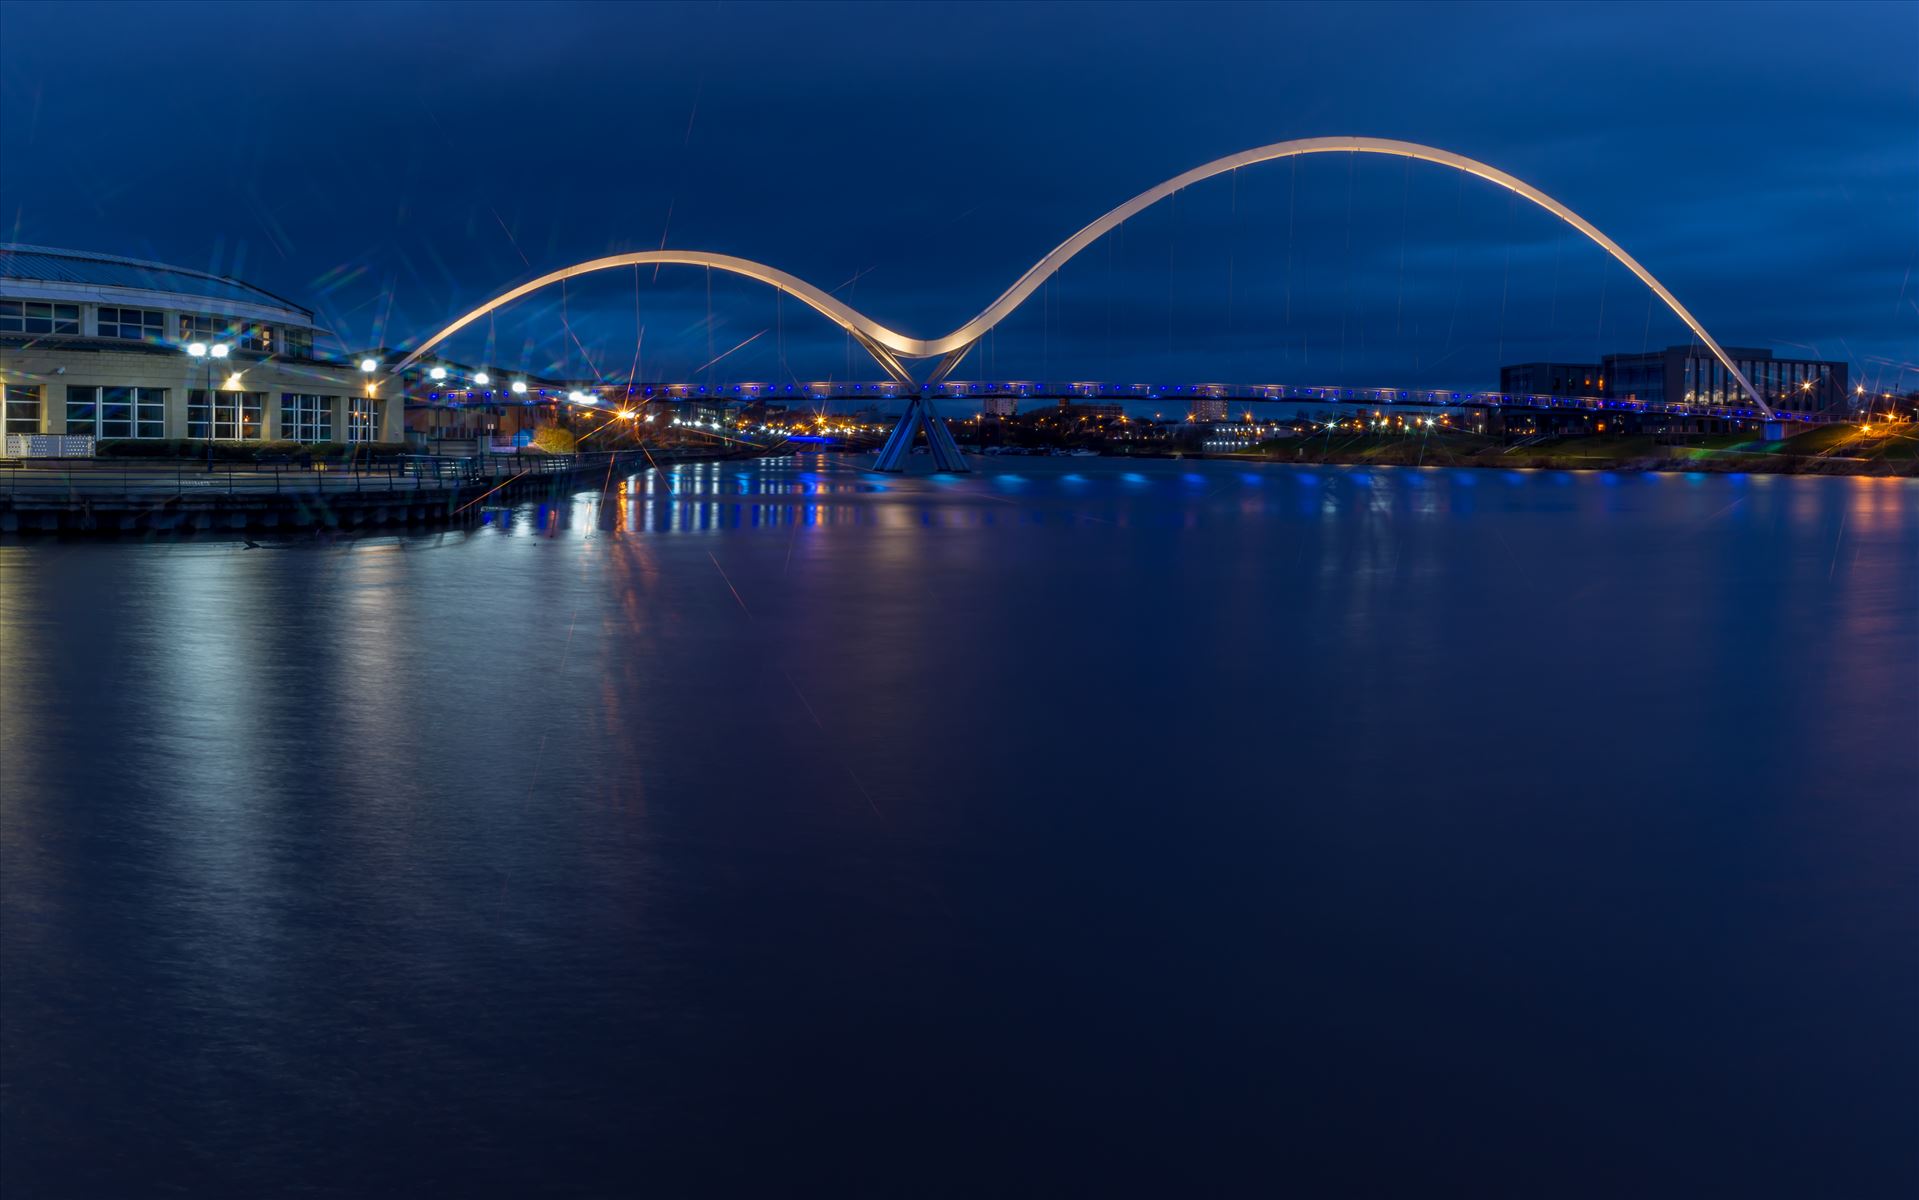 The Infinity Bridge 15 The Infinity Bridge is a public pedestrian and cycle footbridge across the River Tees that was officially opened on 14 May 2009 at a cost of £15 million. by philreay